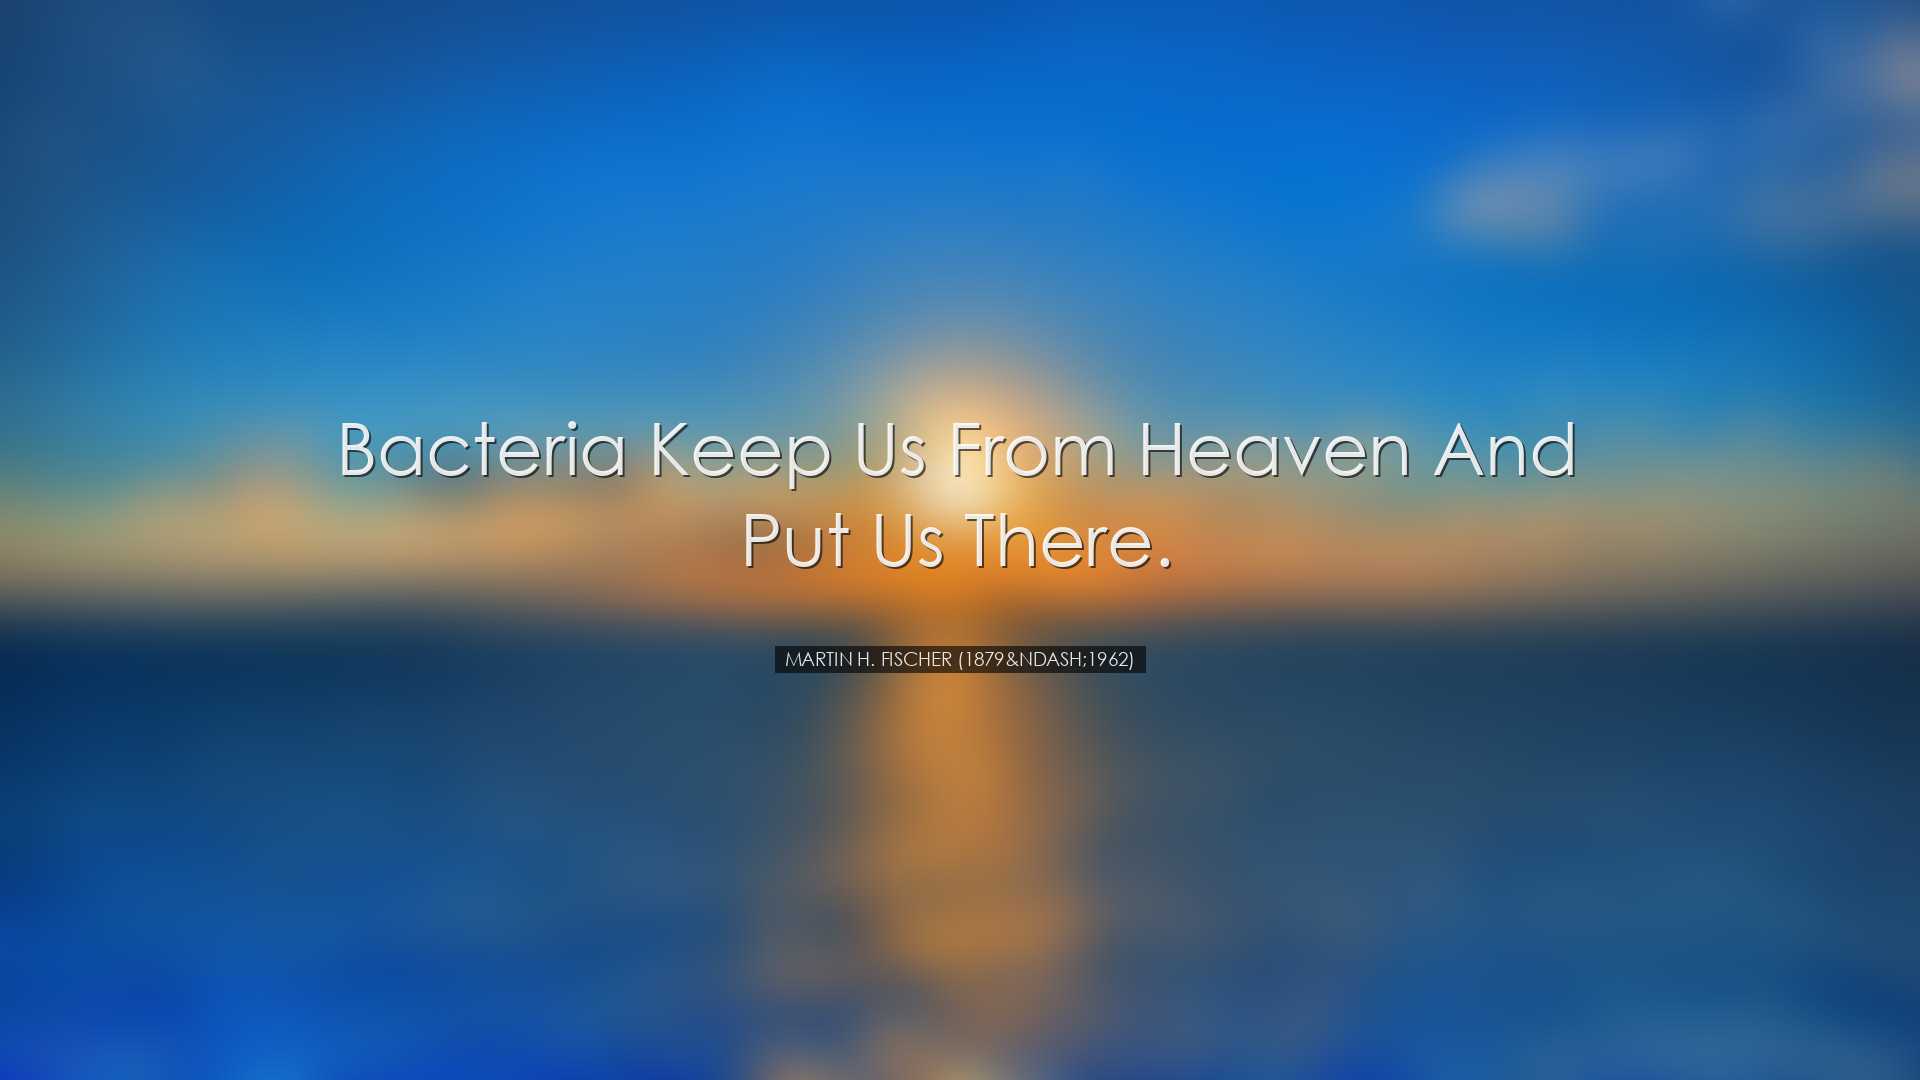 Bacteria keep us from heaven and put us there. - Martin H. Fischer